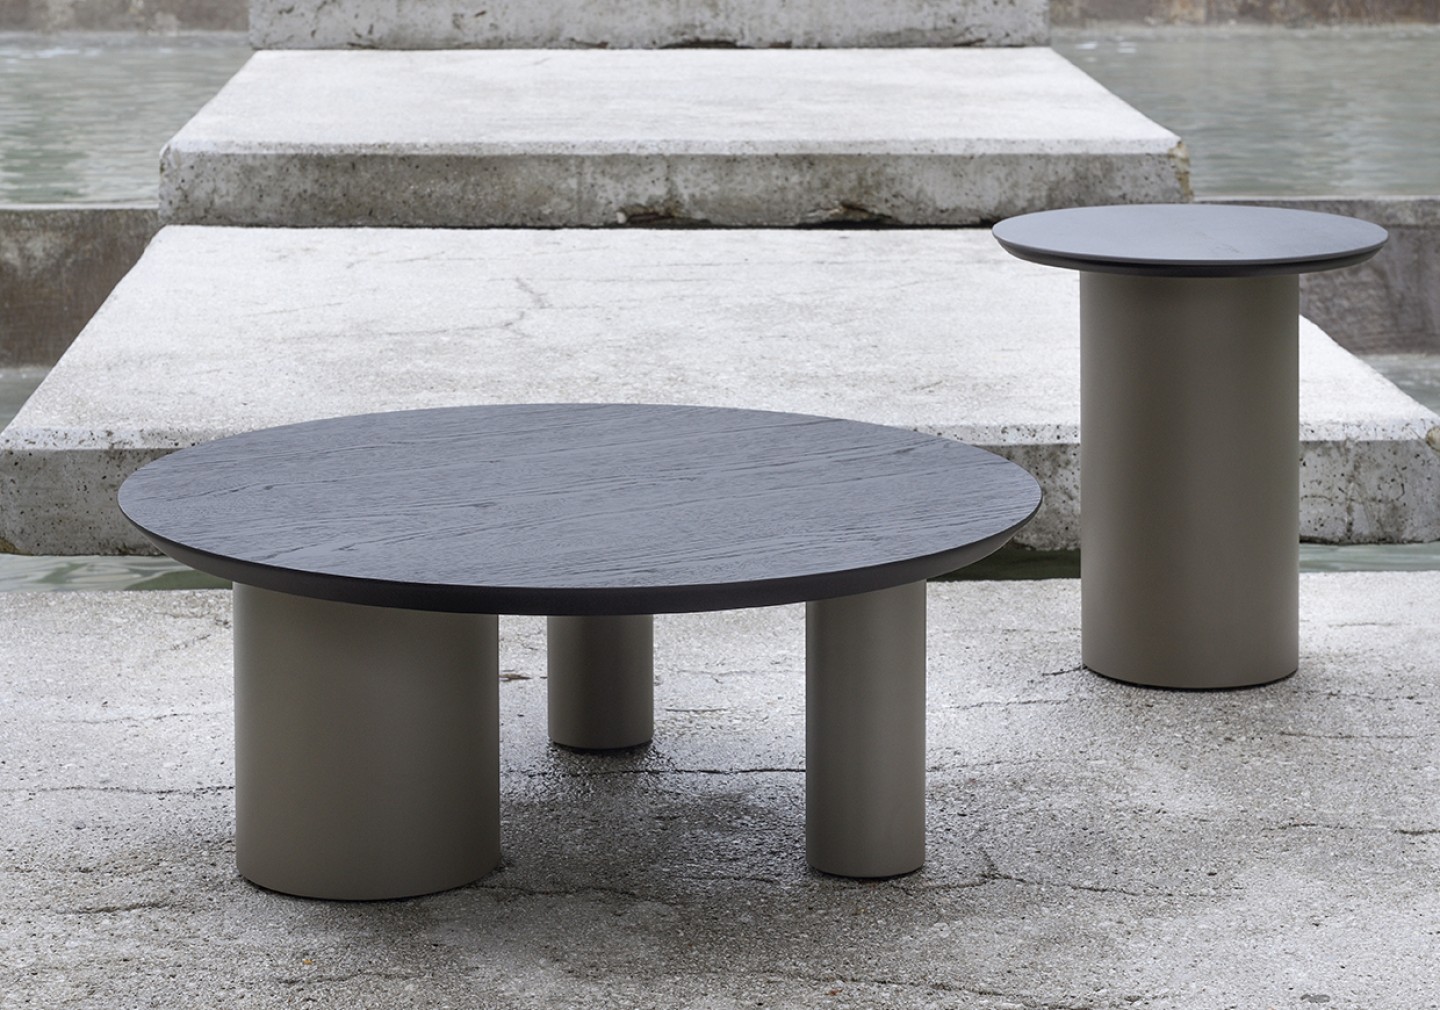 THE NORA ROUND COFFEE TABLE